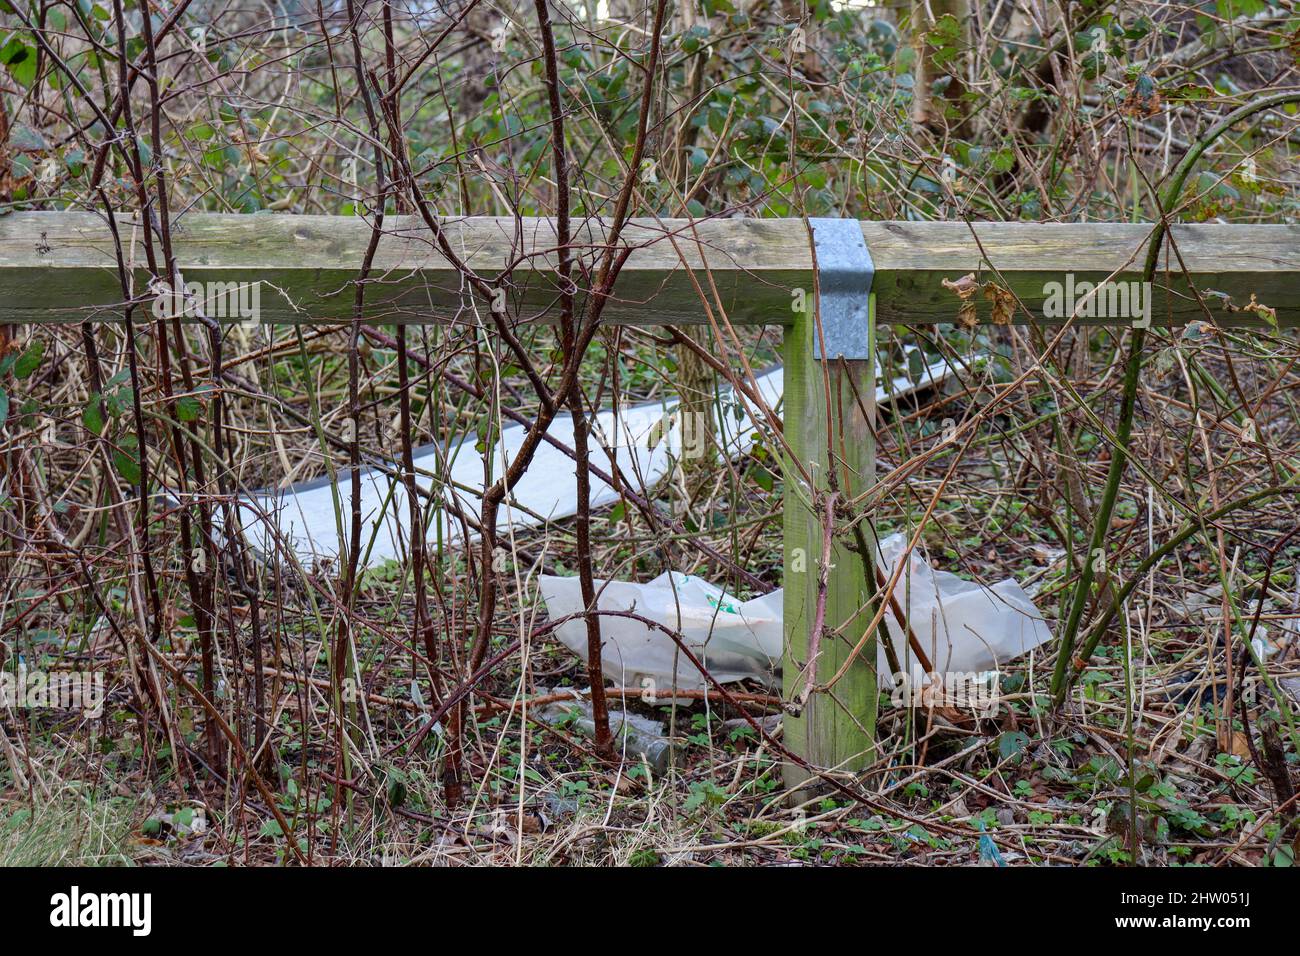 Rubbish and plastic dumped in woodland, littering and pollution, fly-tipping Stock Photo